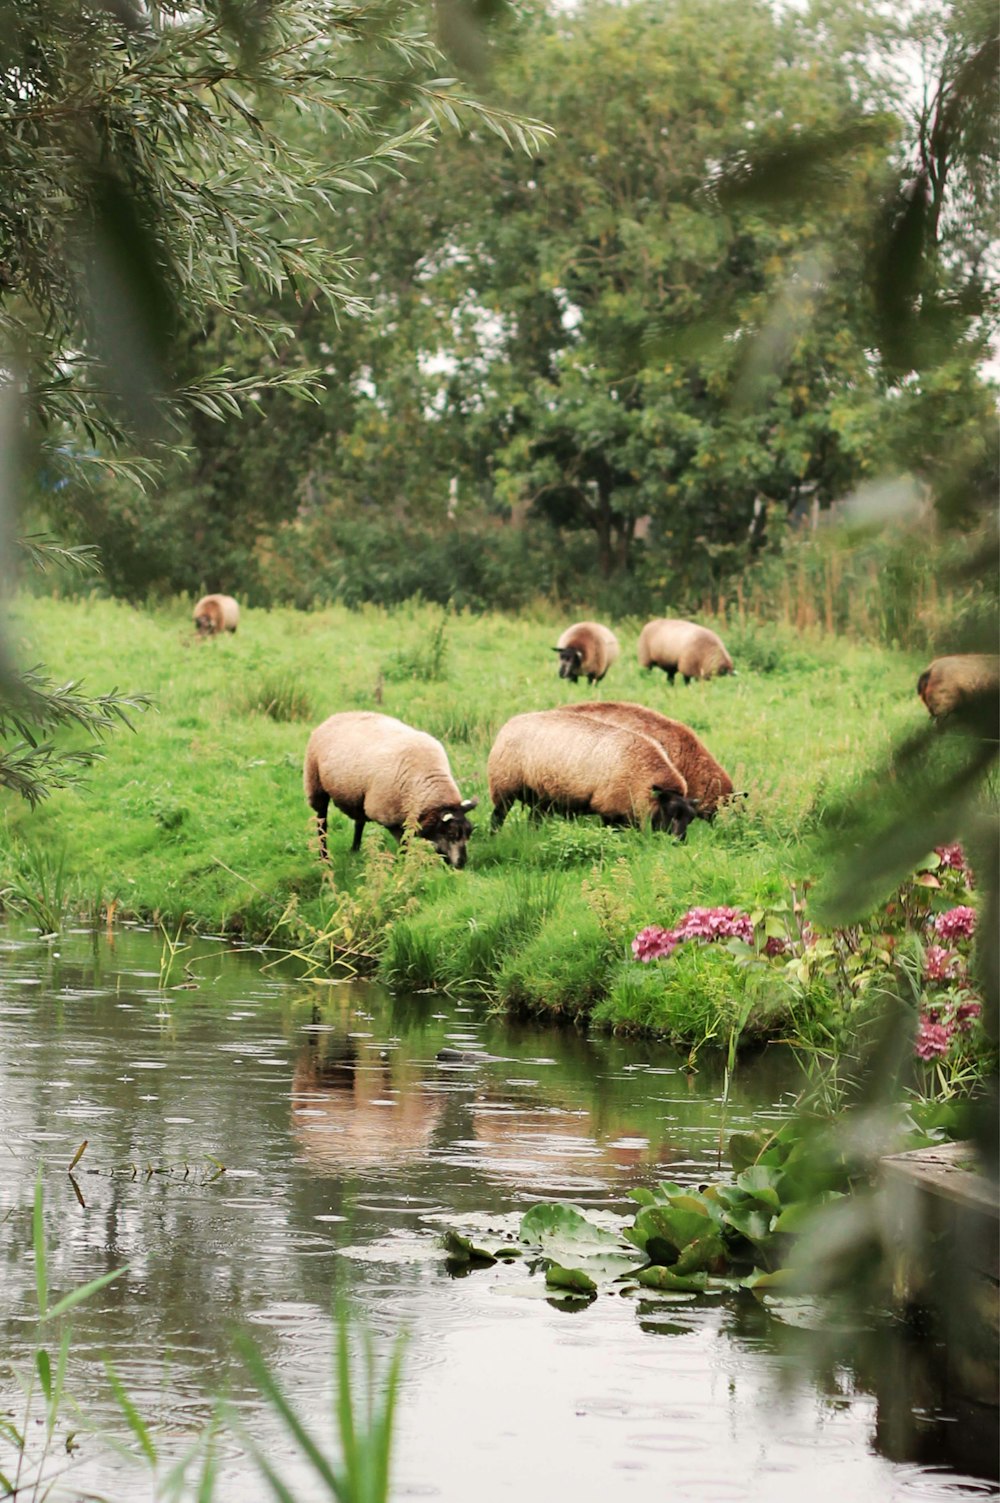 a herd of sheep grazing on a lush green field next to a river